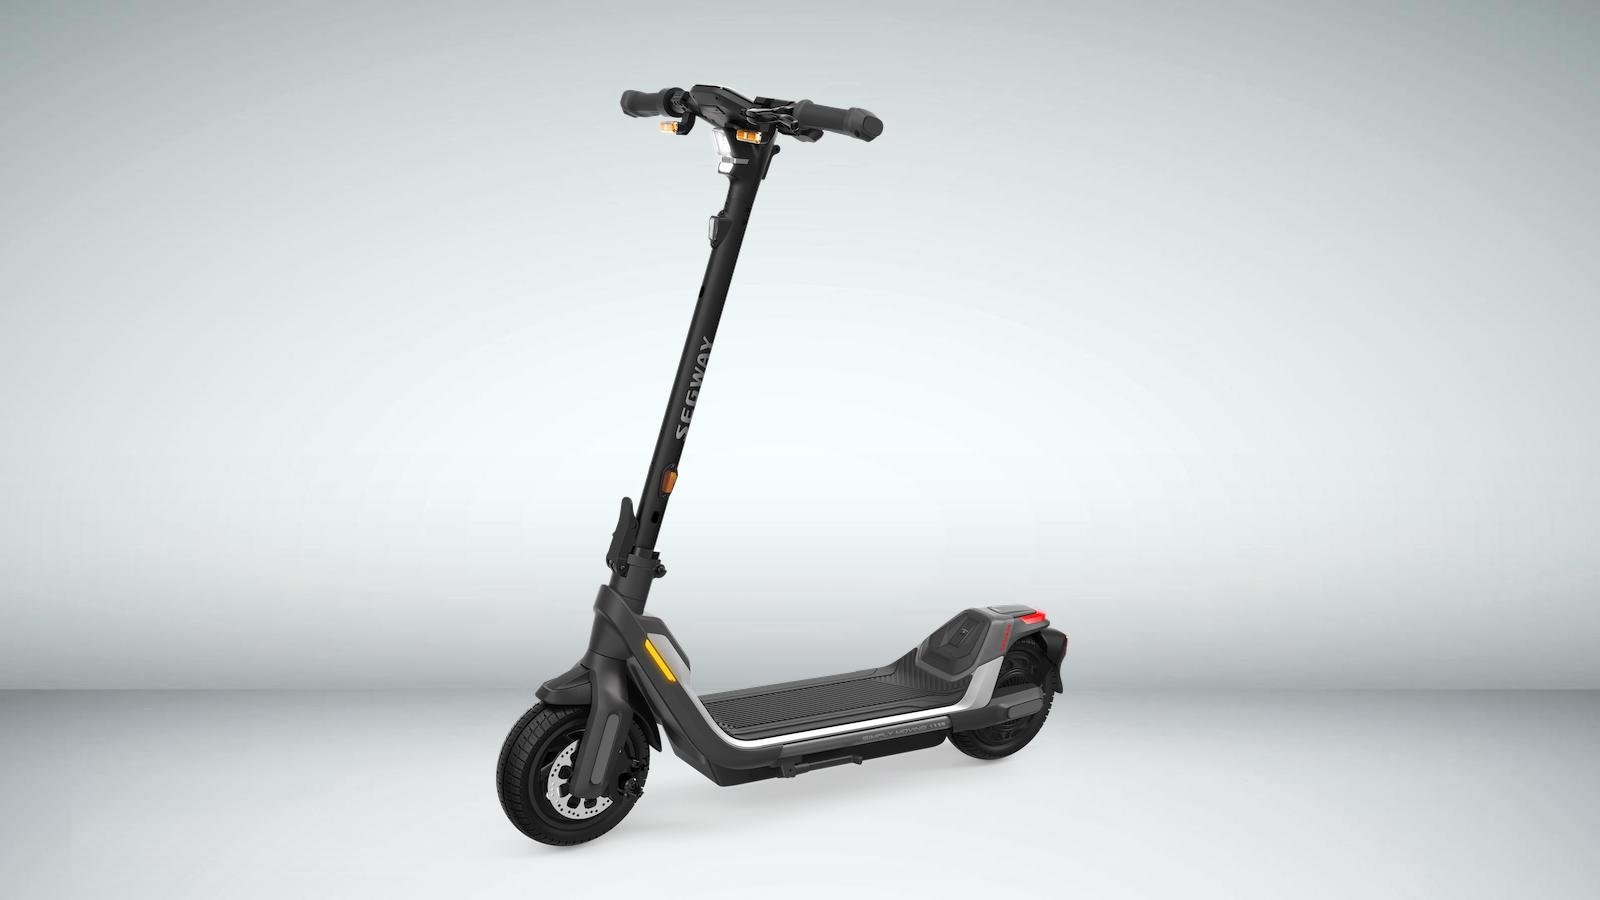 Segway P Series eKickScooters offer a maximum speed of 26.7 mph and have 650 W motors